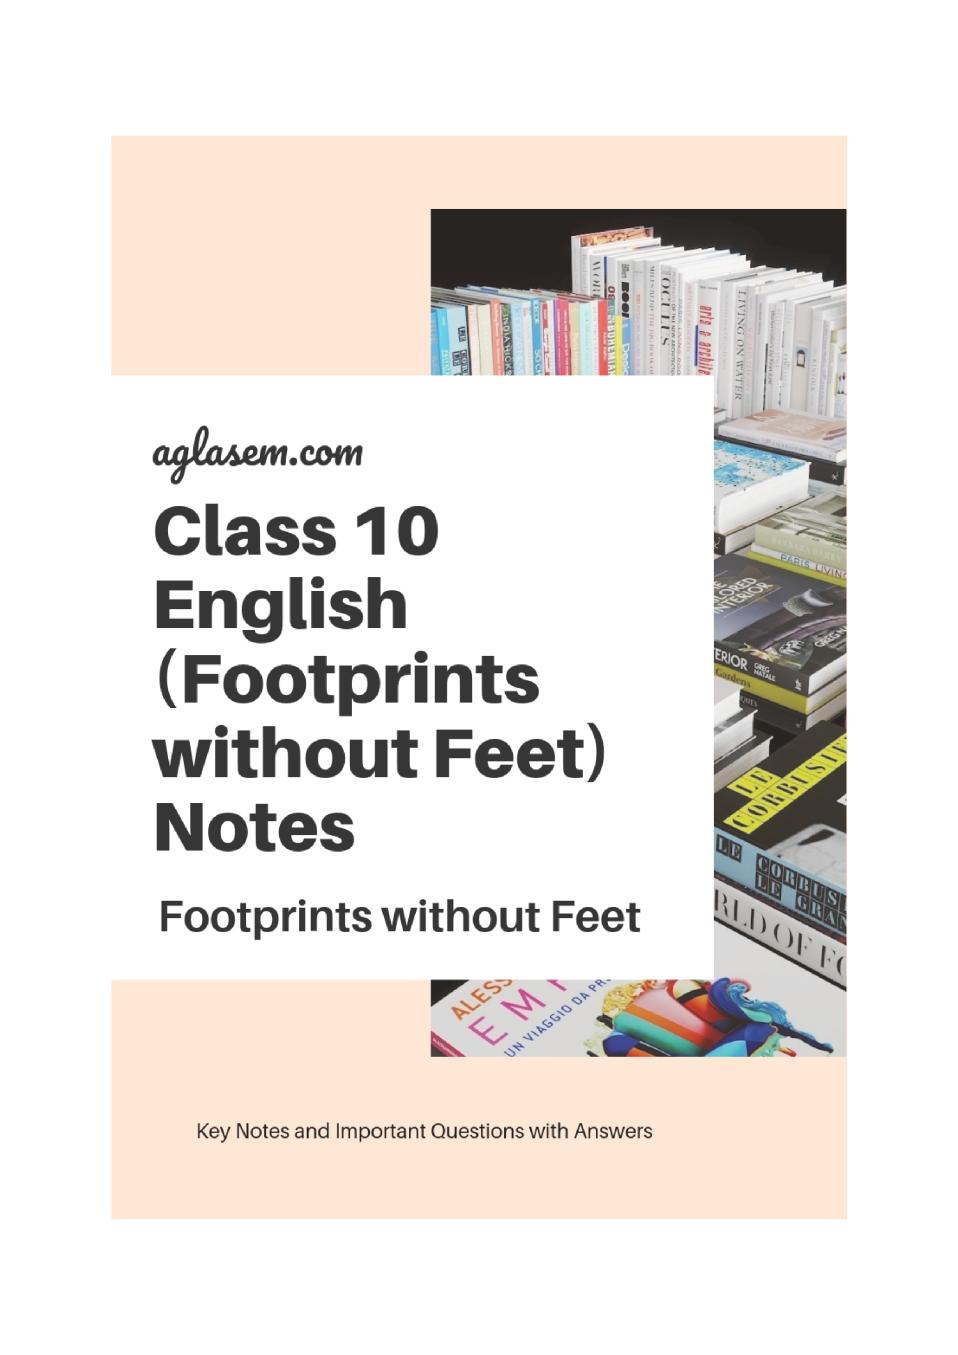 Class 10 English Footprints without Feet Notes For Footprints without Feet - Page 1